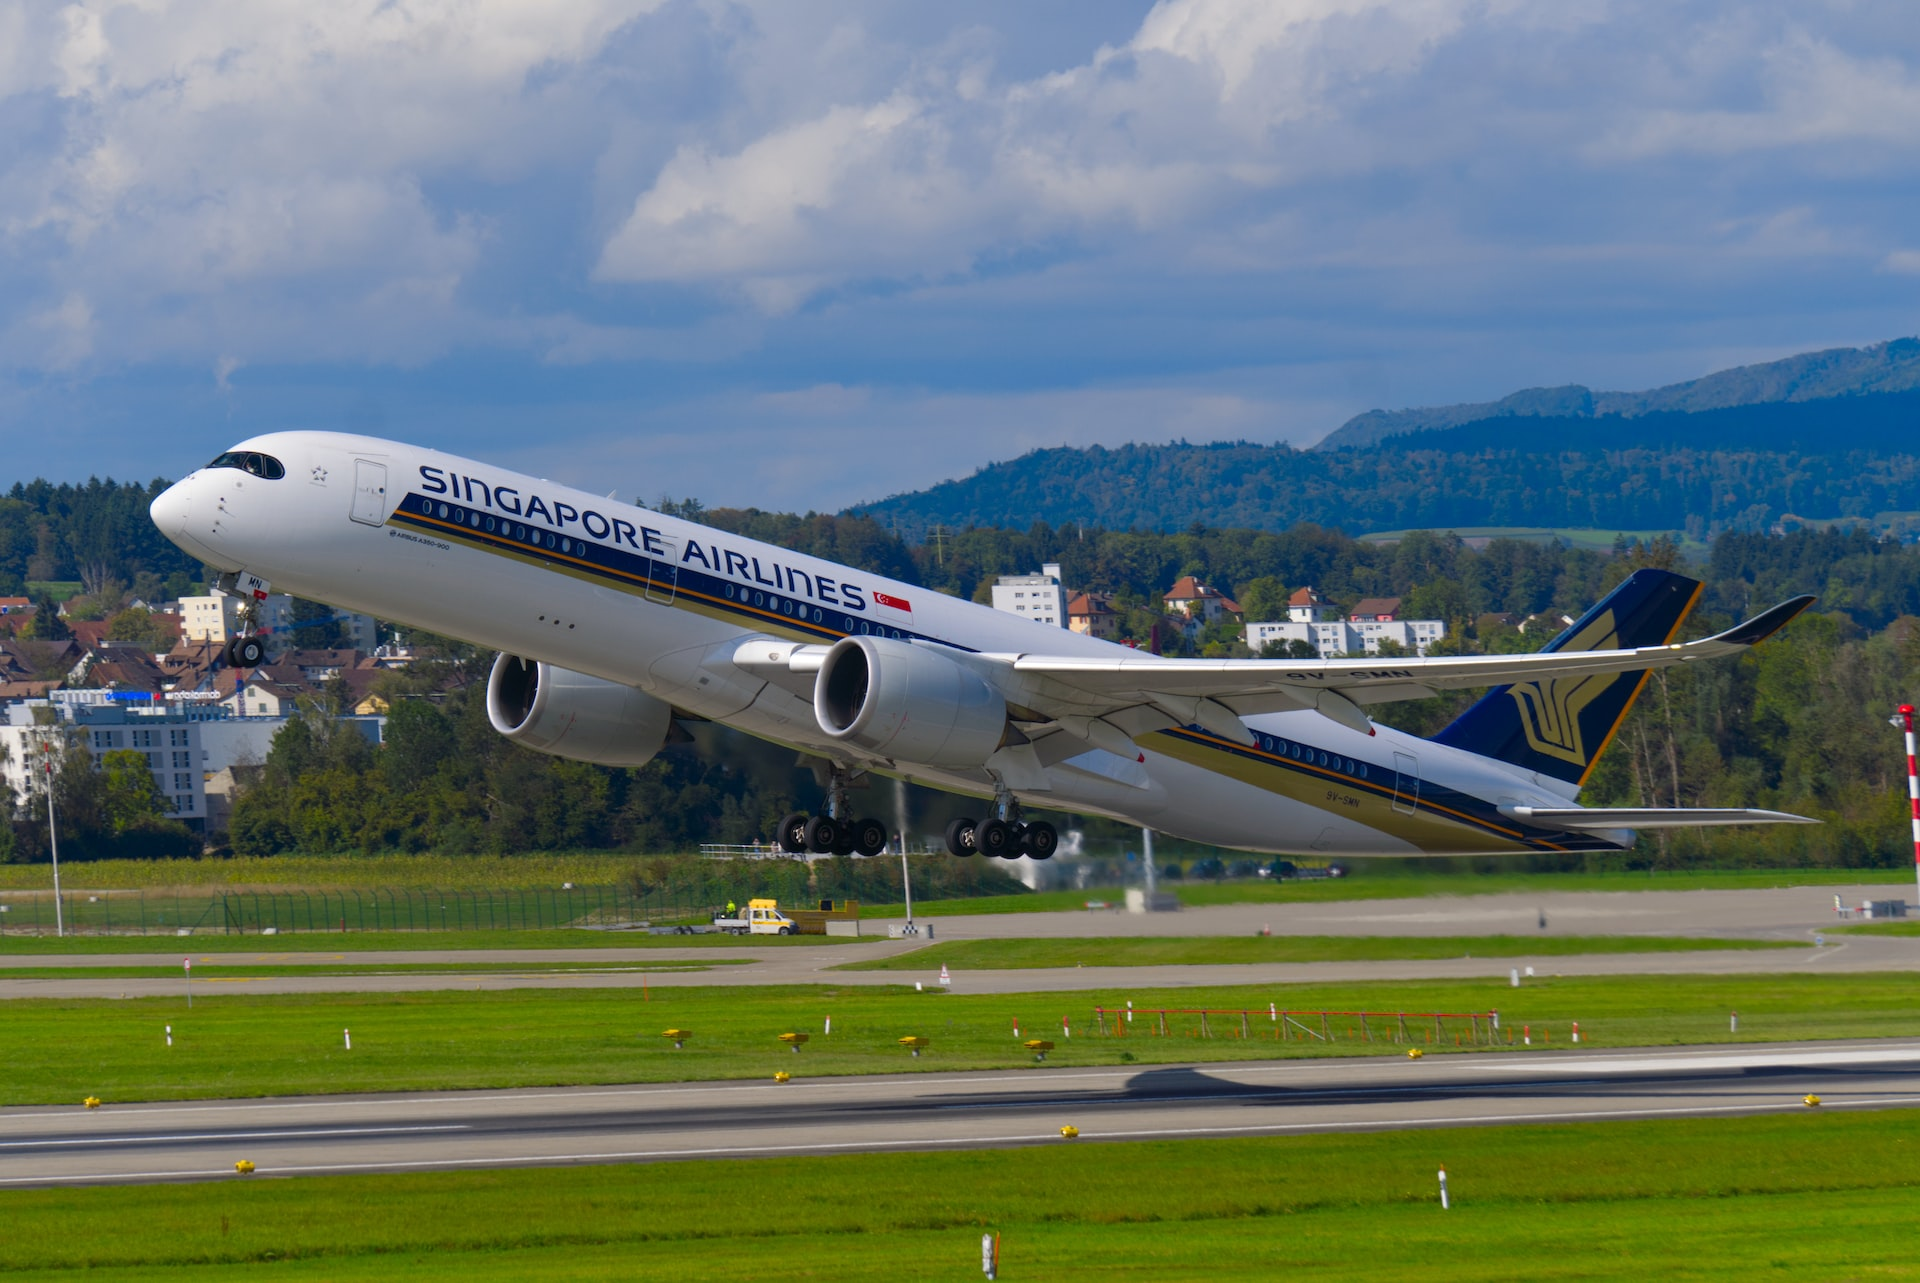 Singapore Airlines Airbus taking off from the runway.